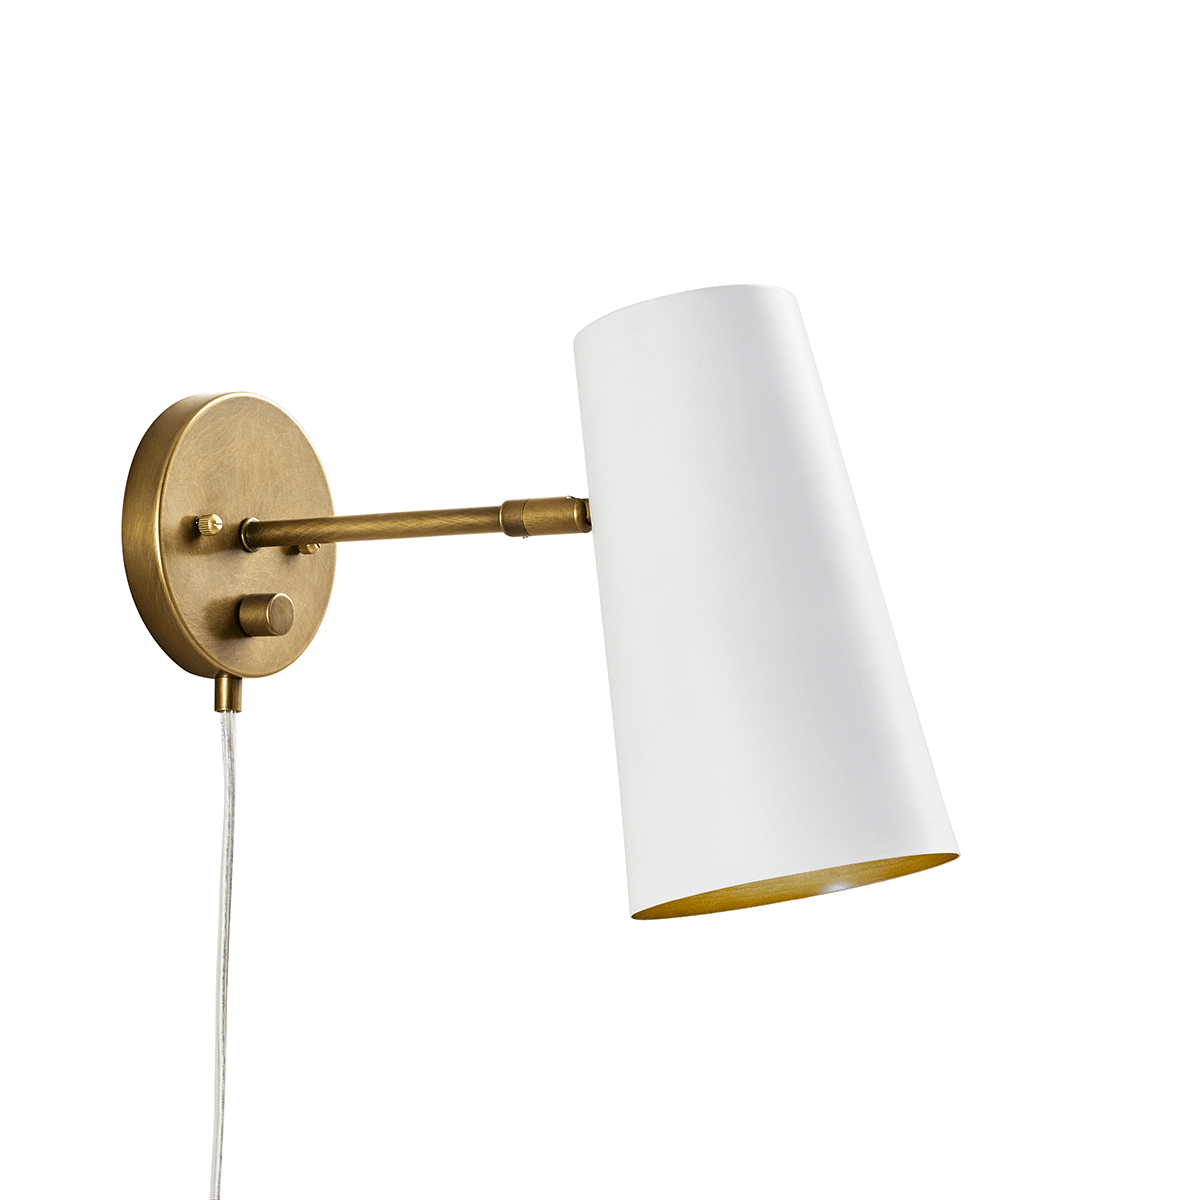 Adjustability options for the Salema 9 Inch 1 Light  Plug-In Wall Sconce in Natural Brass and White